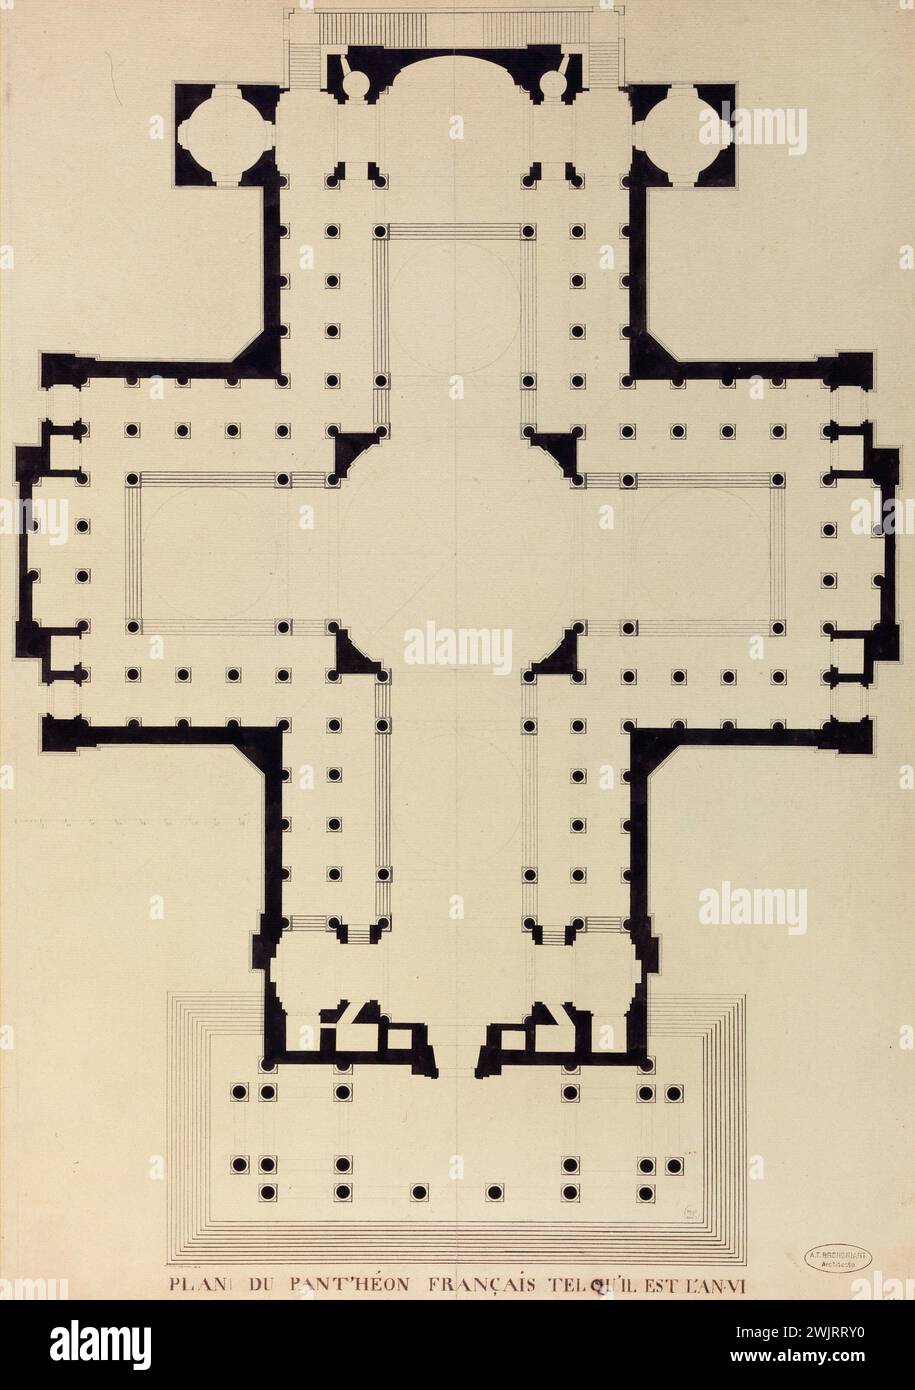 Alexandre Théodore Brongniart (1739-1813). Pantheon plan. Paris (5th arr.), 1739-1813. Chinese ink on brown cardboard paper. Paris, Carnavalet museum. 77651-18 Arrondissement, drawing, ink of China, study, pantheon, plan, project, neoclassical style, veme ve v 5th 5th 5th 5th 5th 5th 5th 5th 5th 5th 5th 5th 5th 5th 5th 5th 5th 5th 5th 5th Stock Photo